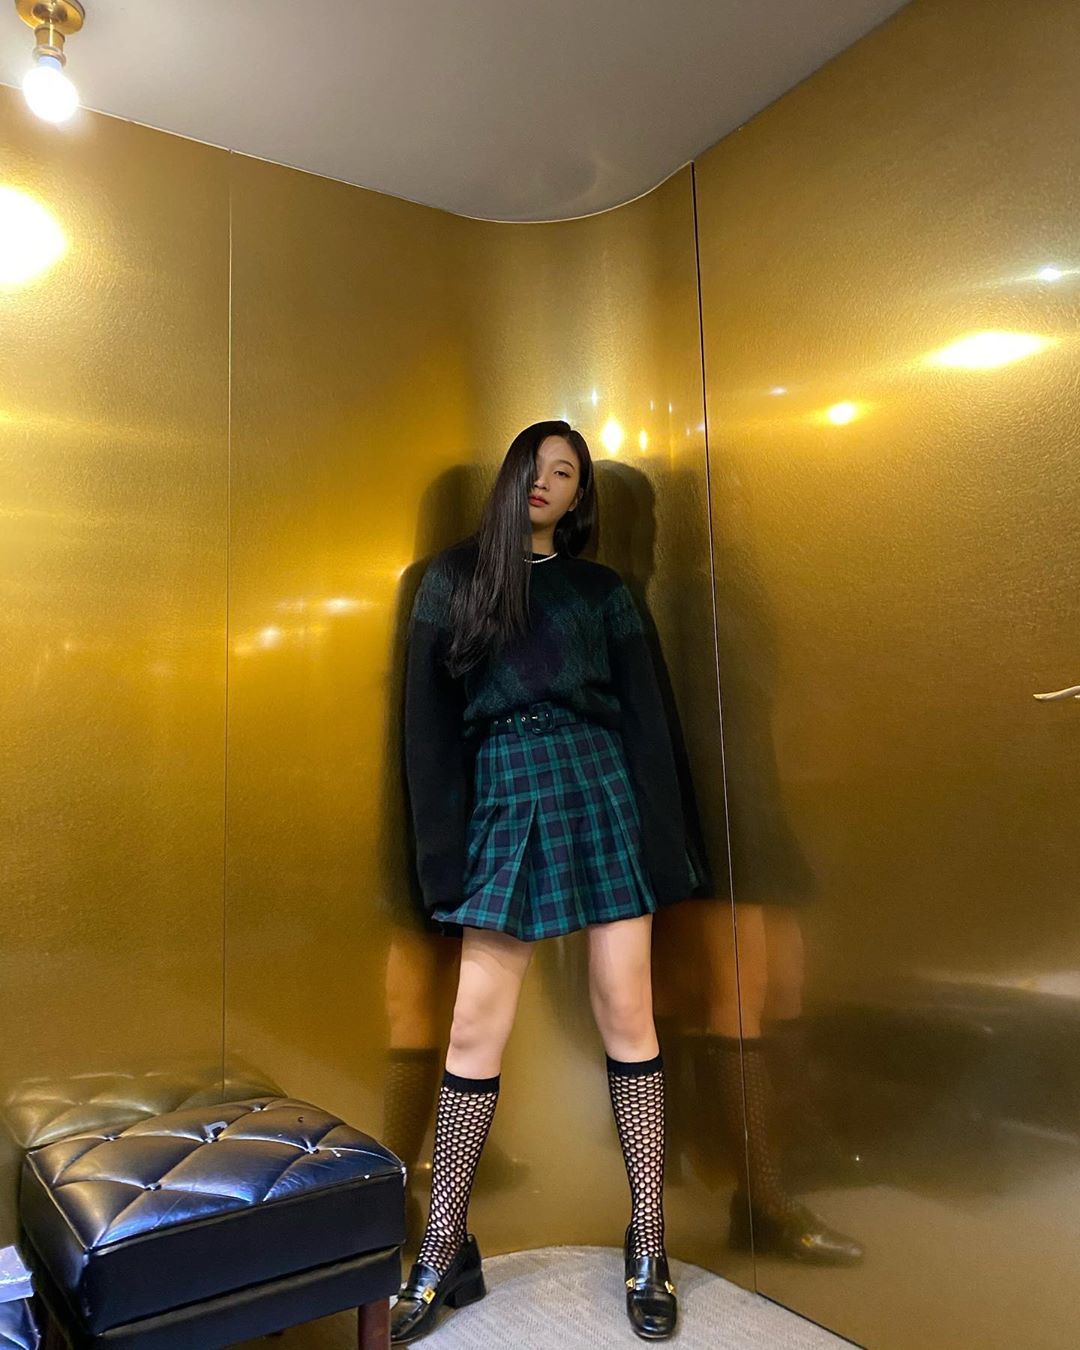 Group Red Velvet Joy shared a routineJoy posted several photos on her Instagram account on Wednesday, along with a smiling emoticon.In the open photo, Joy is making a cute smile with long straight hair. Joy, wearing a dark knit and check skirt, boasted a pure yet elegant charm and caught his attention.In another photo, Joy has long hair hanging down to her shoulders and is looking at the camera with dreamy eyes.Joys small face size and superior glamorousness completed the Model-like ratio and impressed.Joy recently appeared on the TVN entertainment program The Tasty Tour.Photo = Joy Instagram